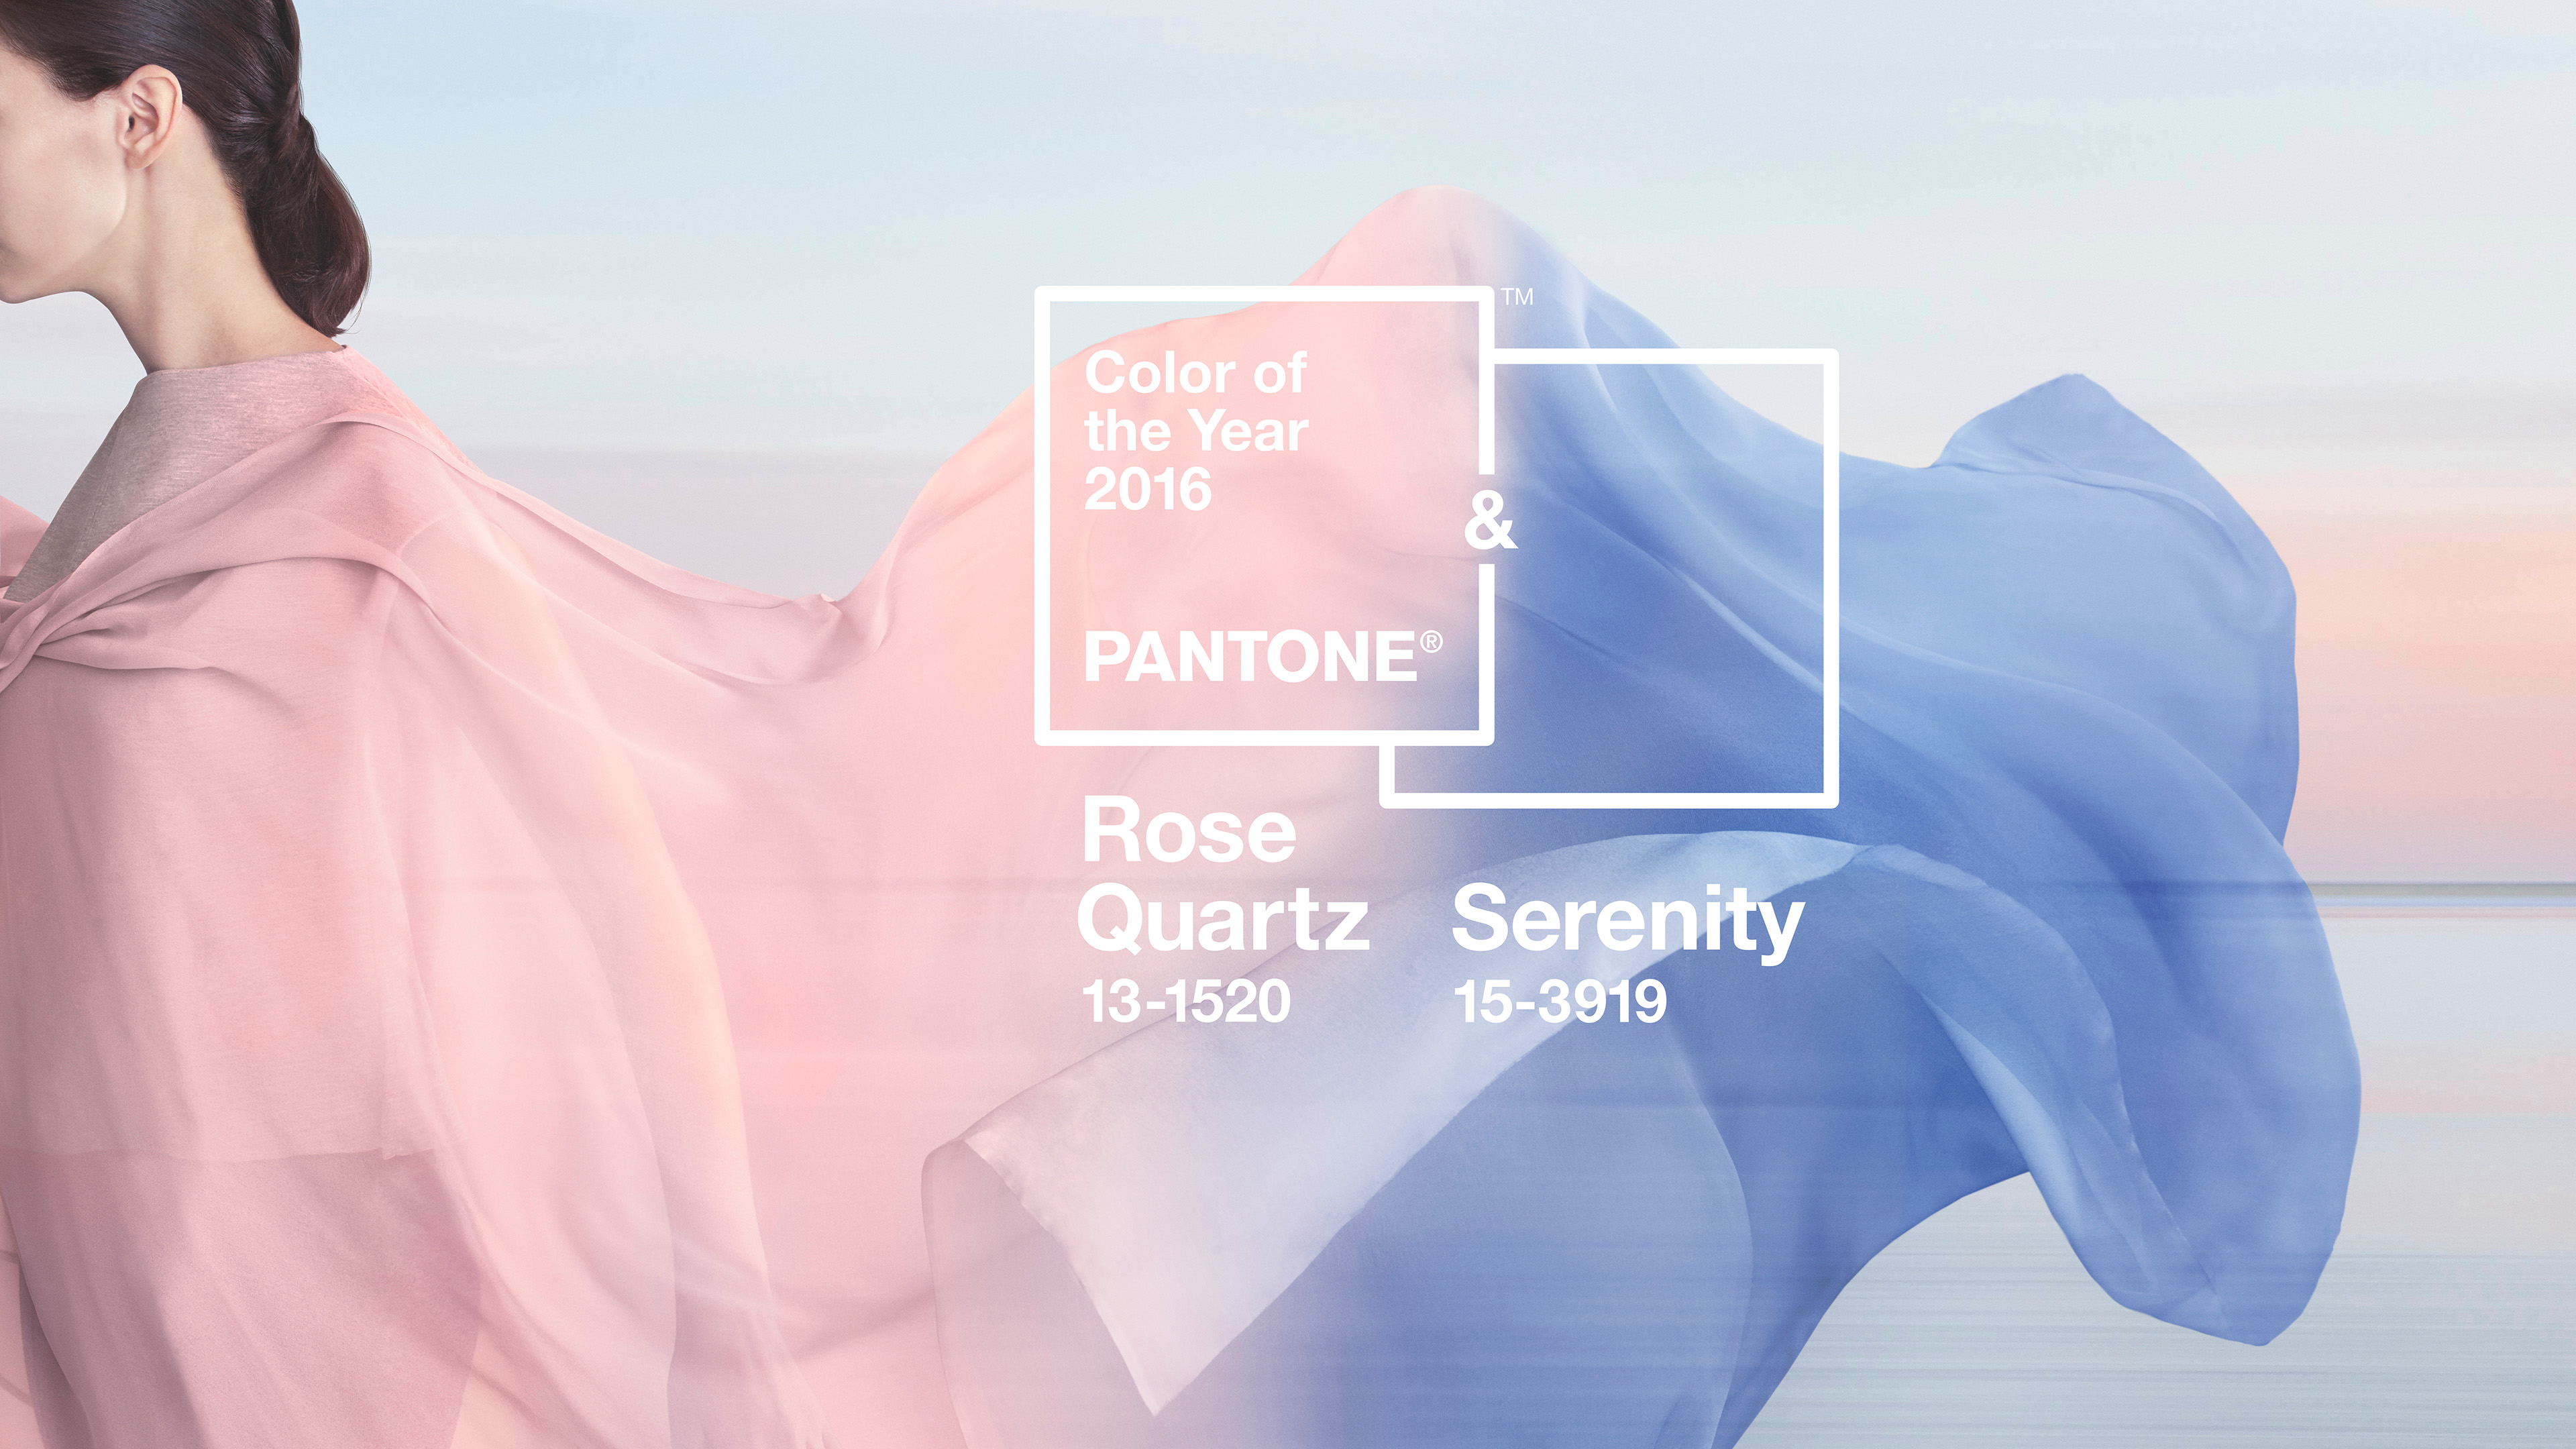 Are You Ready for Pantone Color of the Year 2018? Here's a Recap!